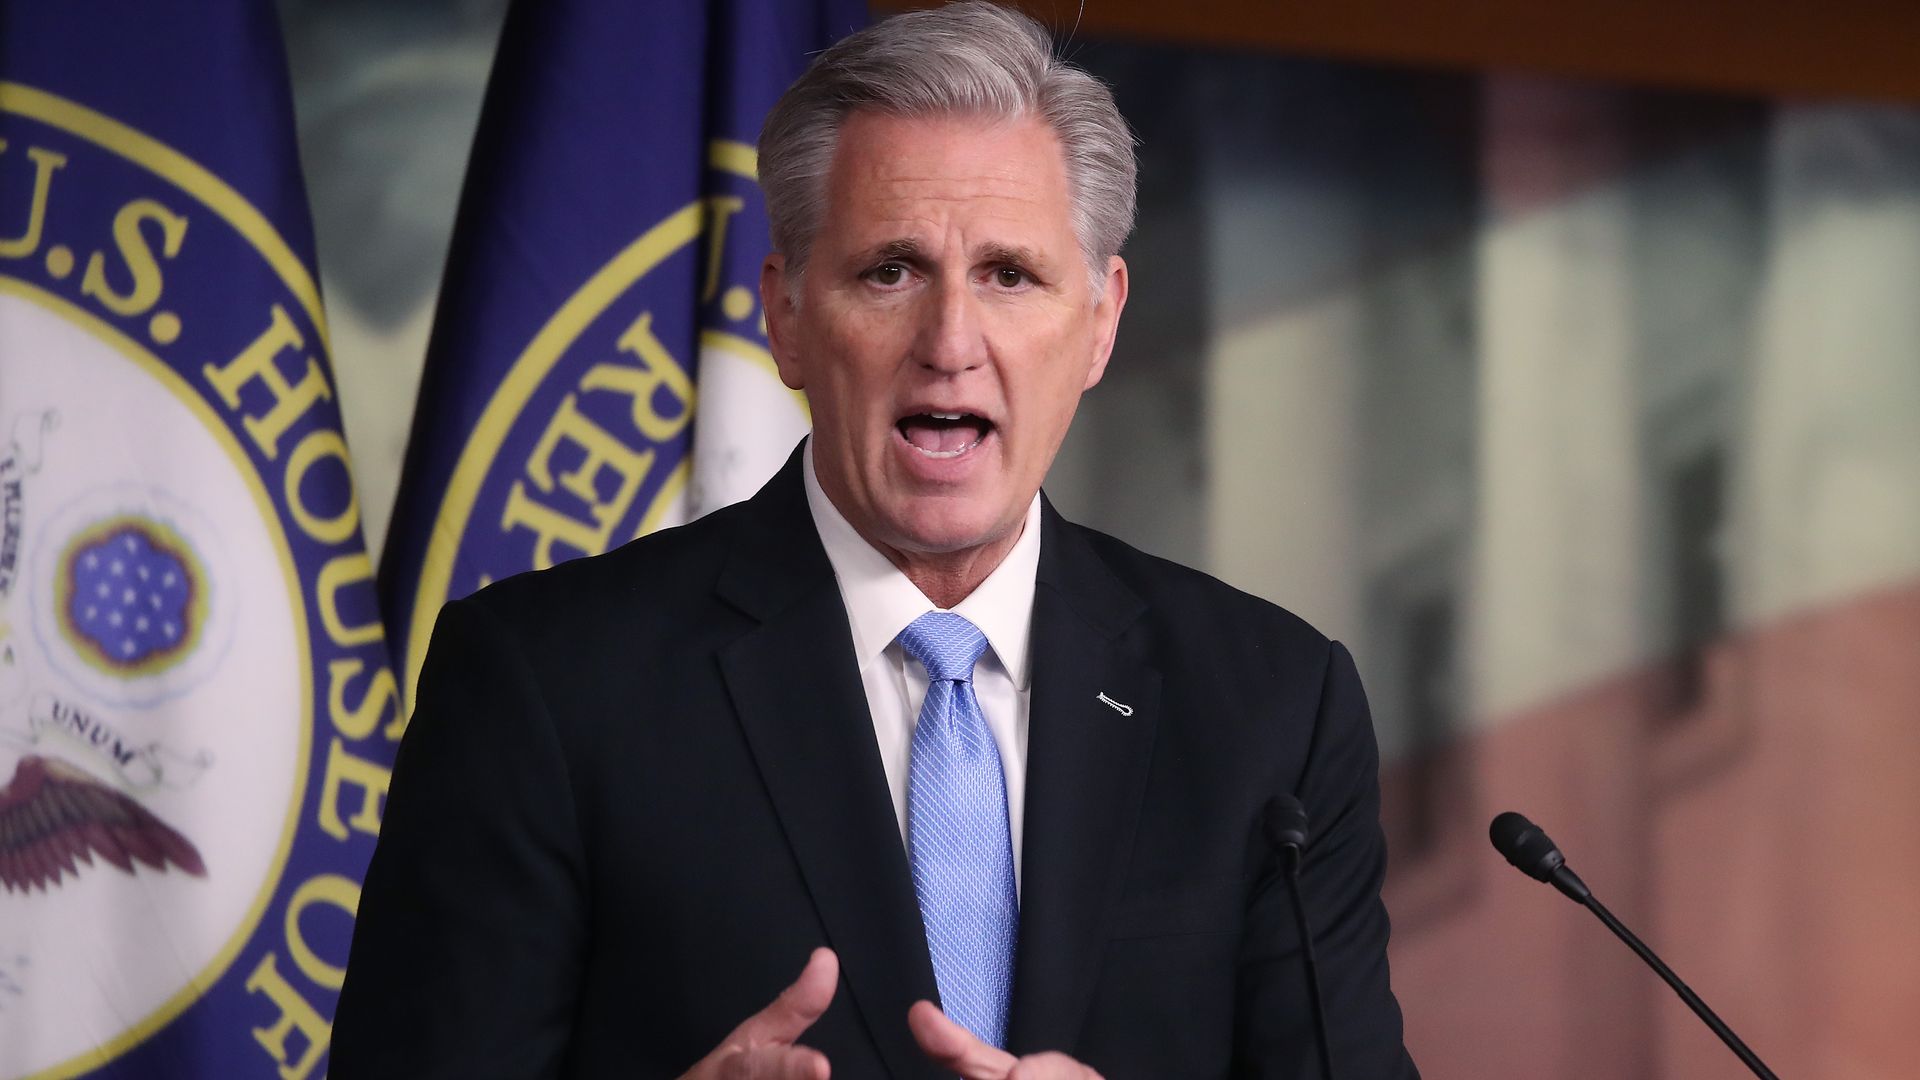 House Minority Leader Kevin McCarthy (R-CA) speaks during his weekly news conference at the U.S. Capitol on February 27, 2020